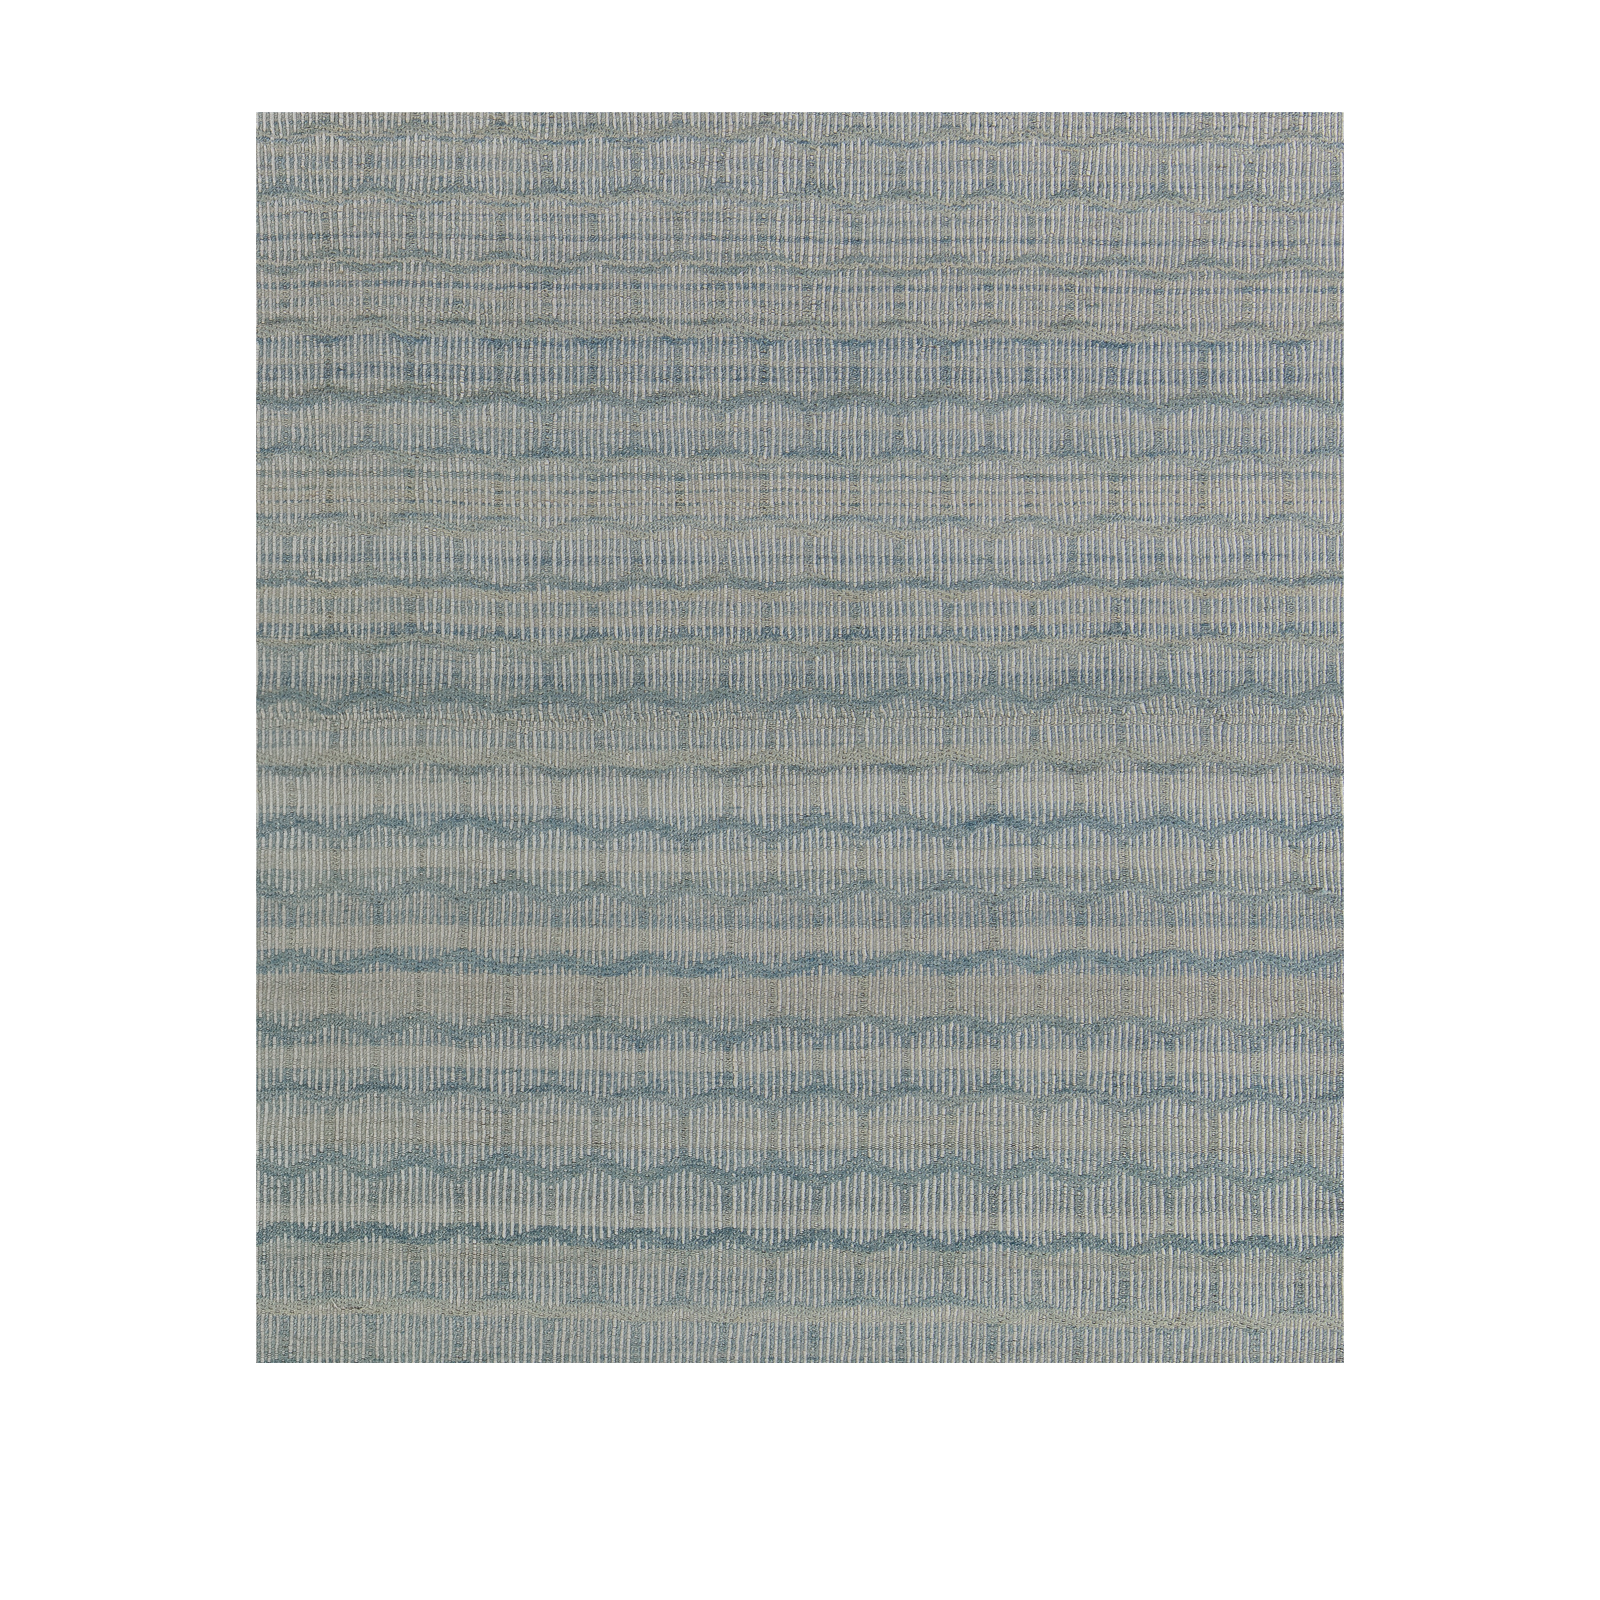 This  Honeycomb Pelas flatweave rug is made with handspun wool and natural dyes.